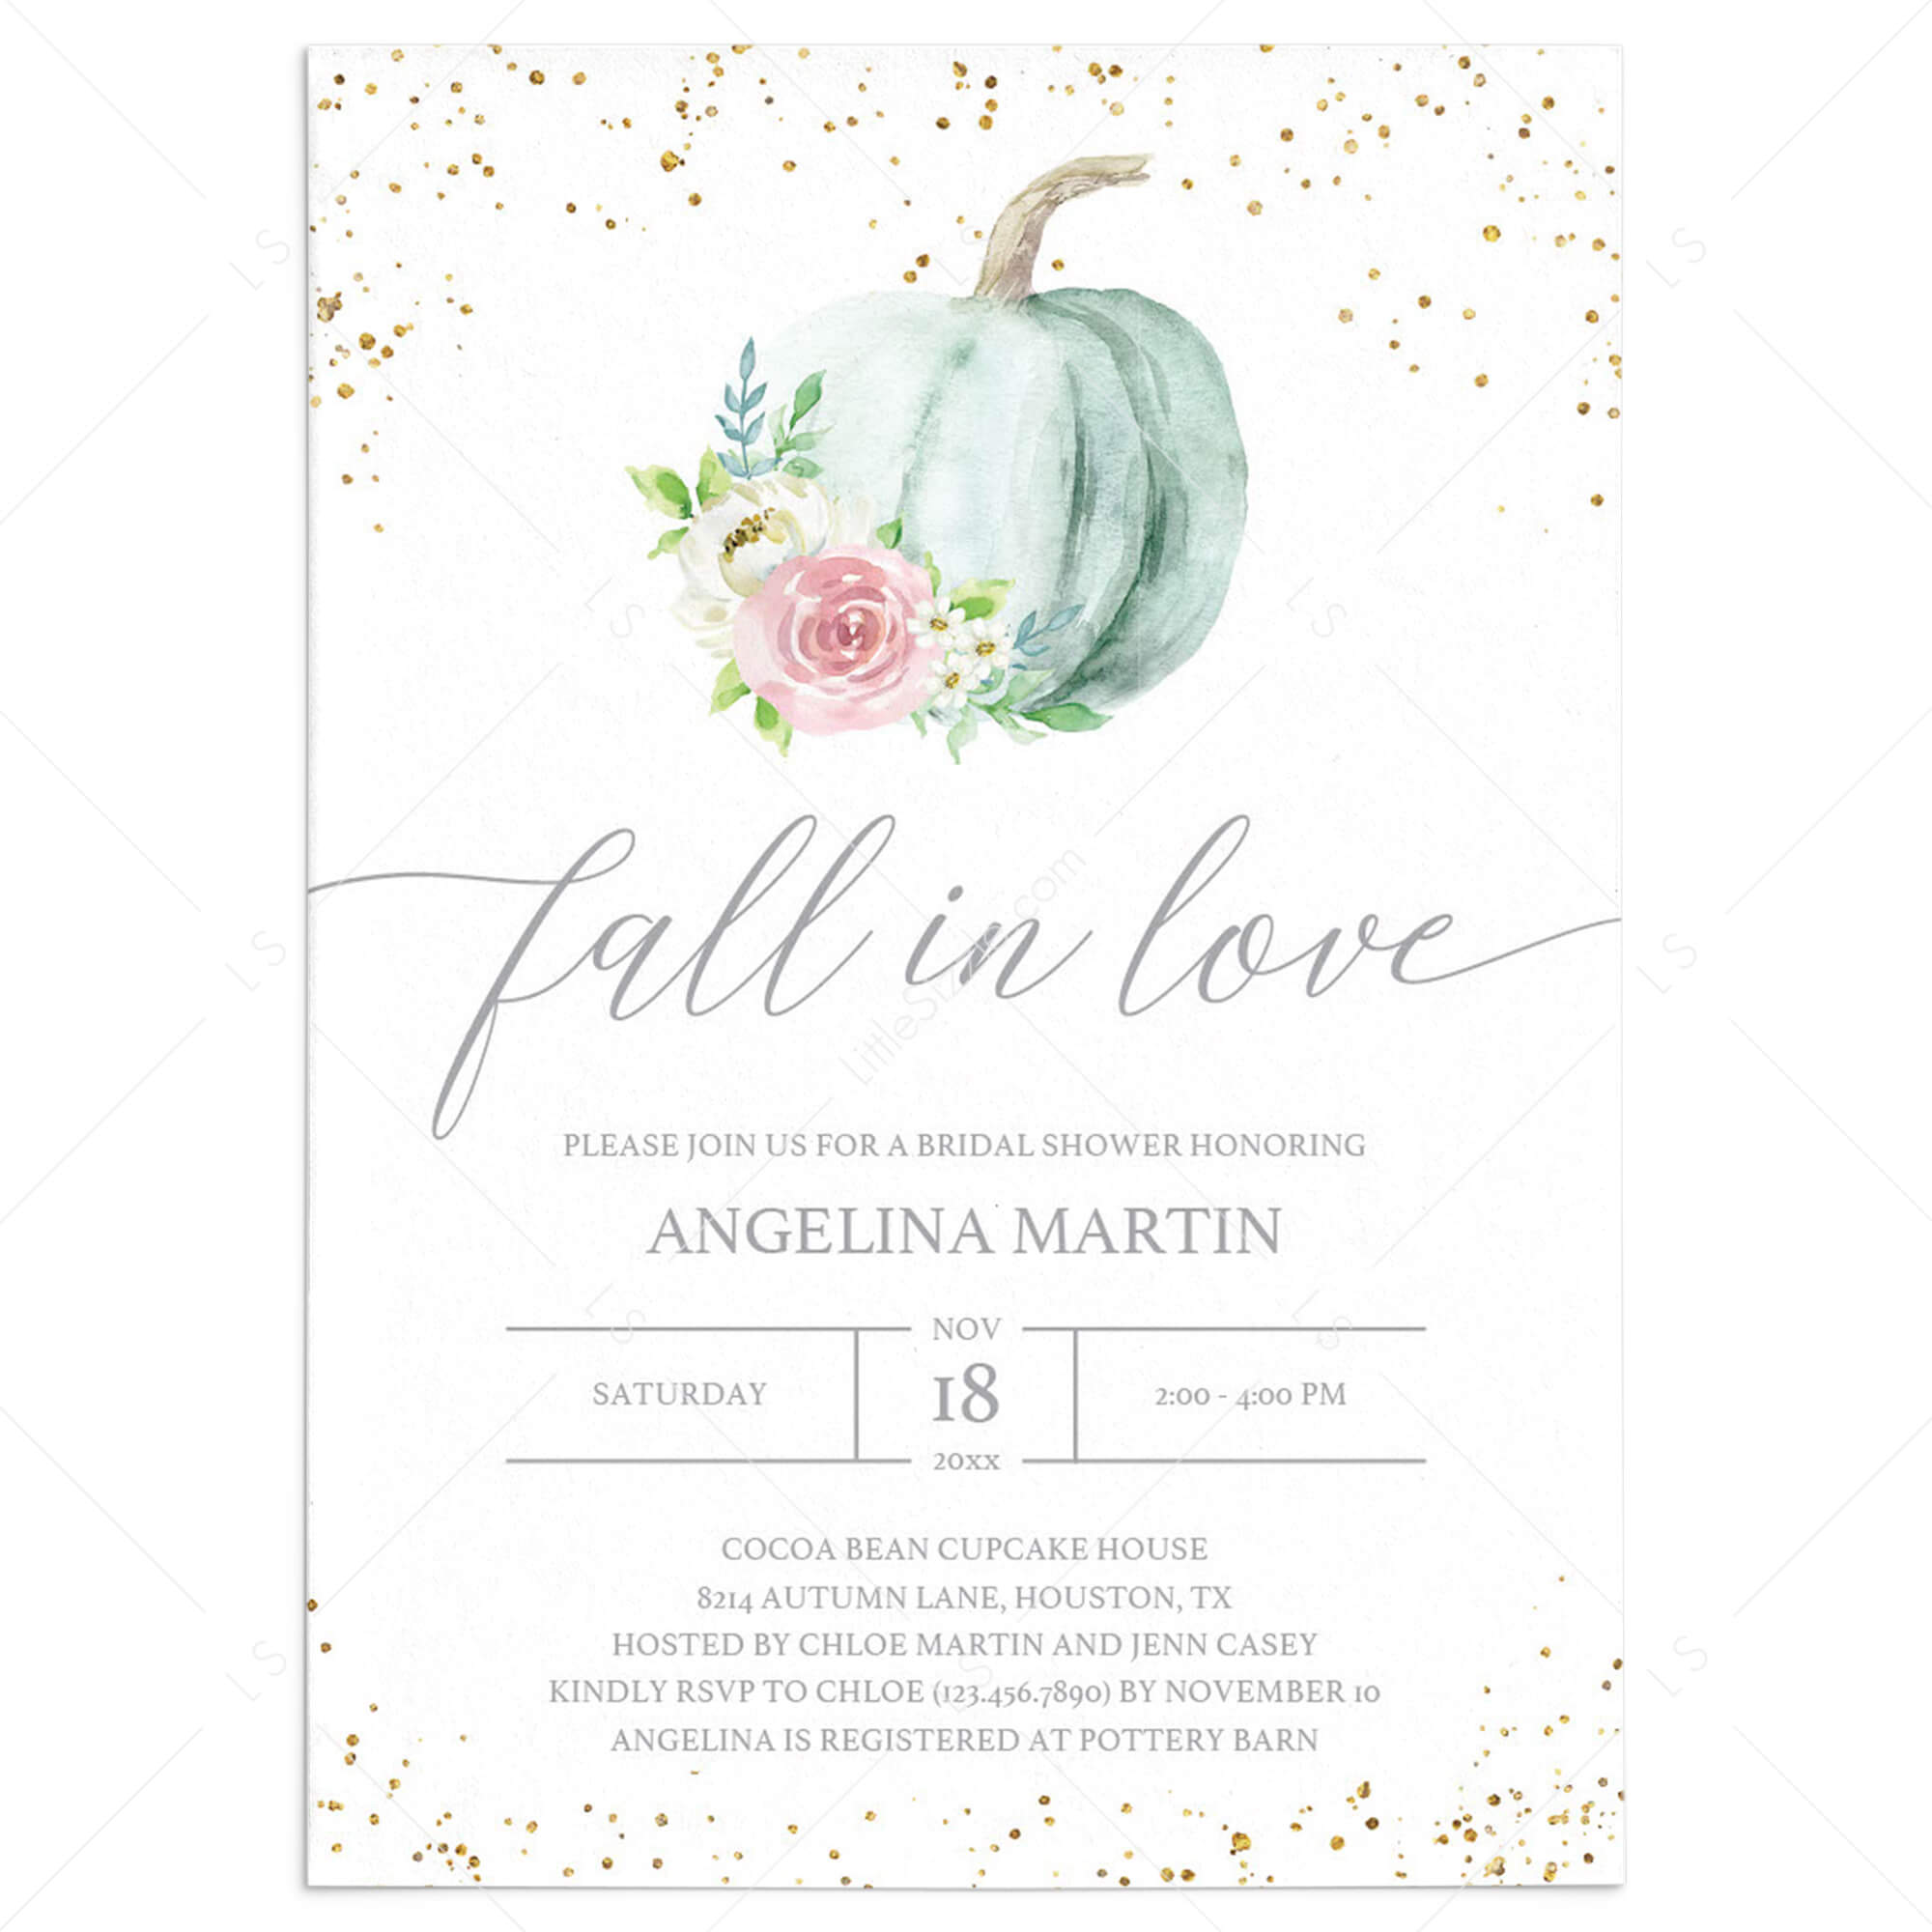 Fall in Love Bridal Shower Invitation with Watercolor Pumpkin by LittleSizzle